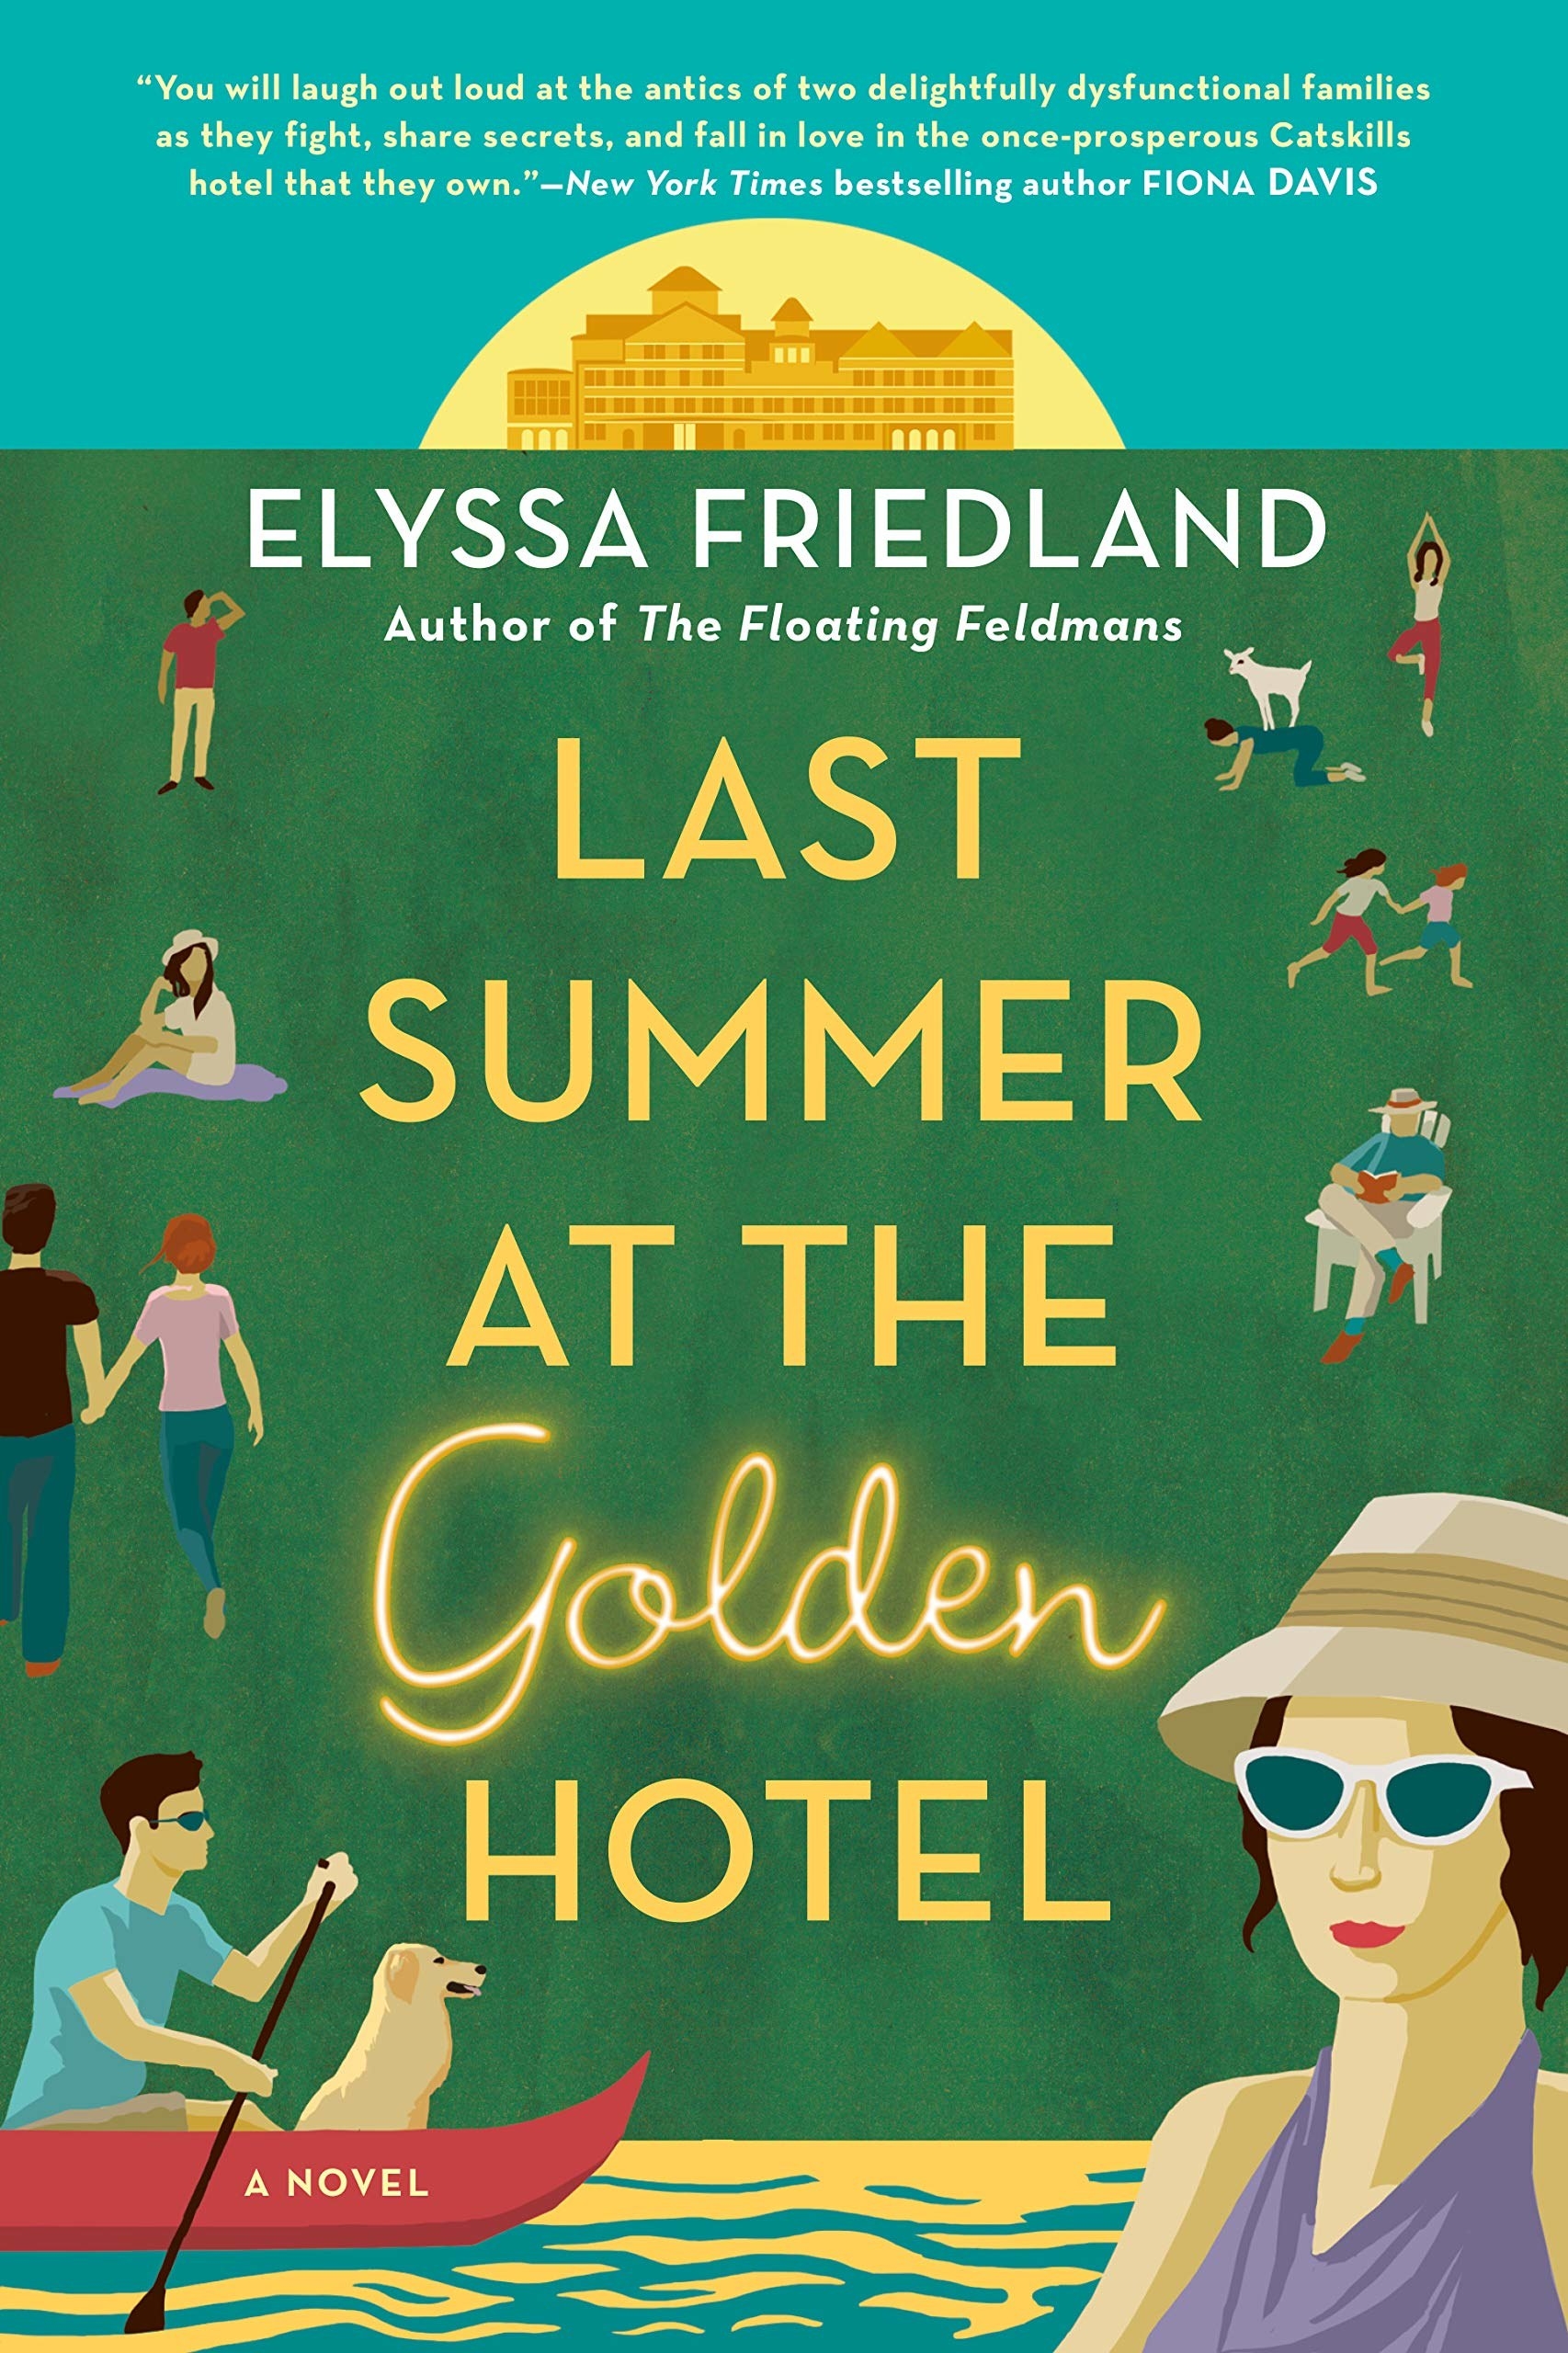 An illustrated hotel in the background, green lawn with people on it. Title reads: &quot;Last Summer at the Golden Hotel.&quot;